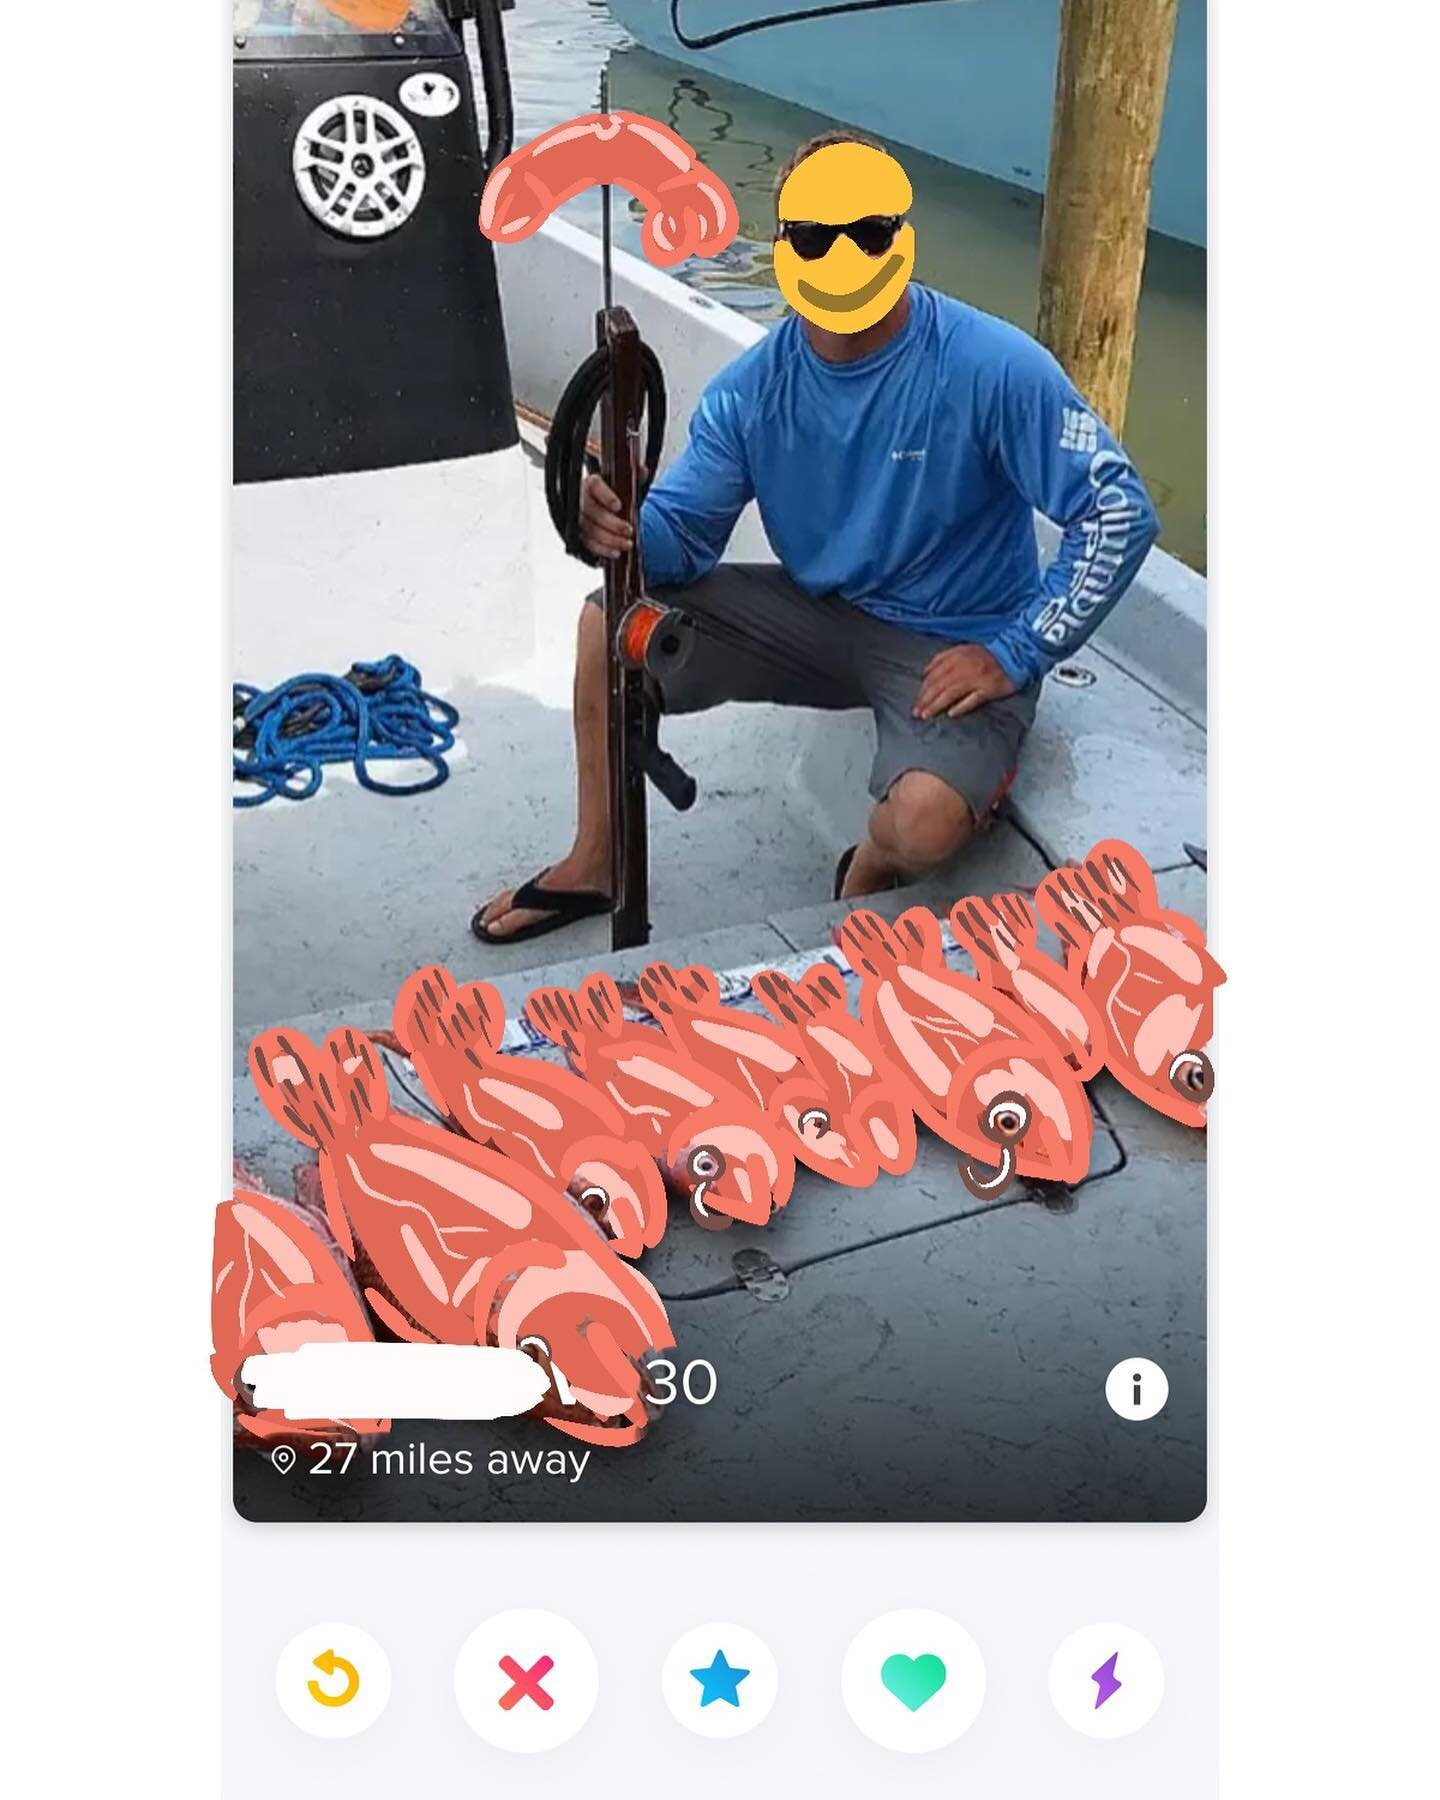 For some reason drawing dildos over fish on pictures from tinder  is really giving me life right now.  #tinderella #tindernightmare #tinderfish